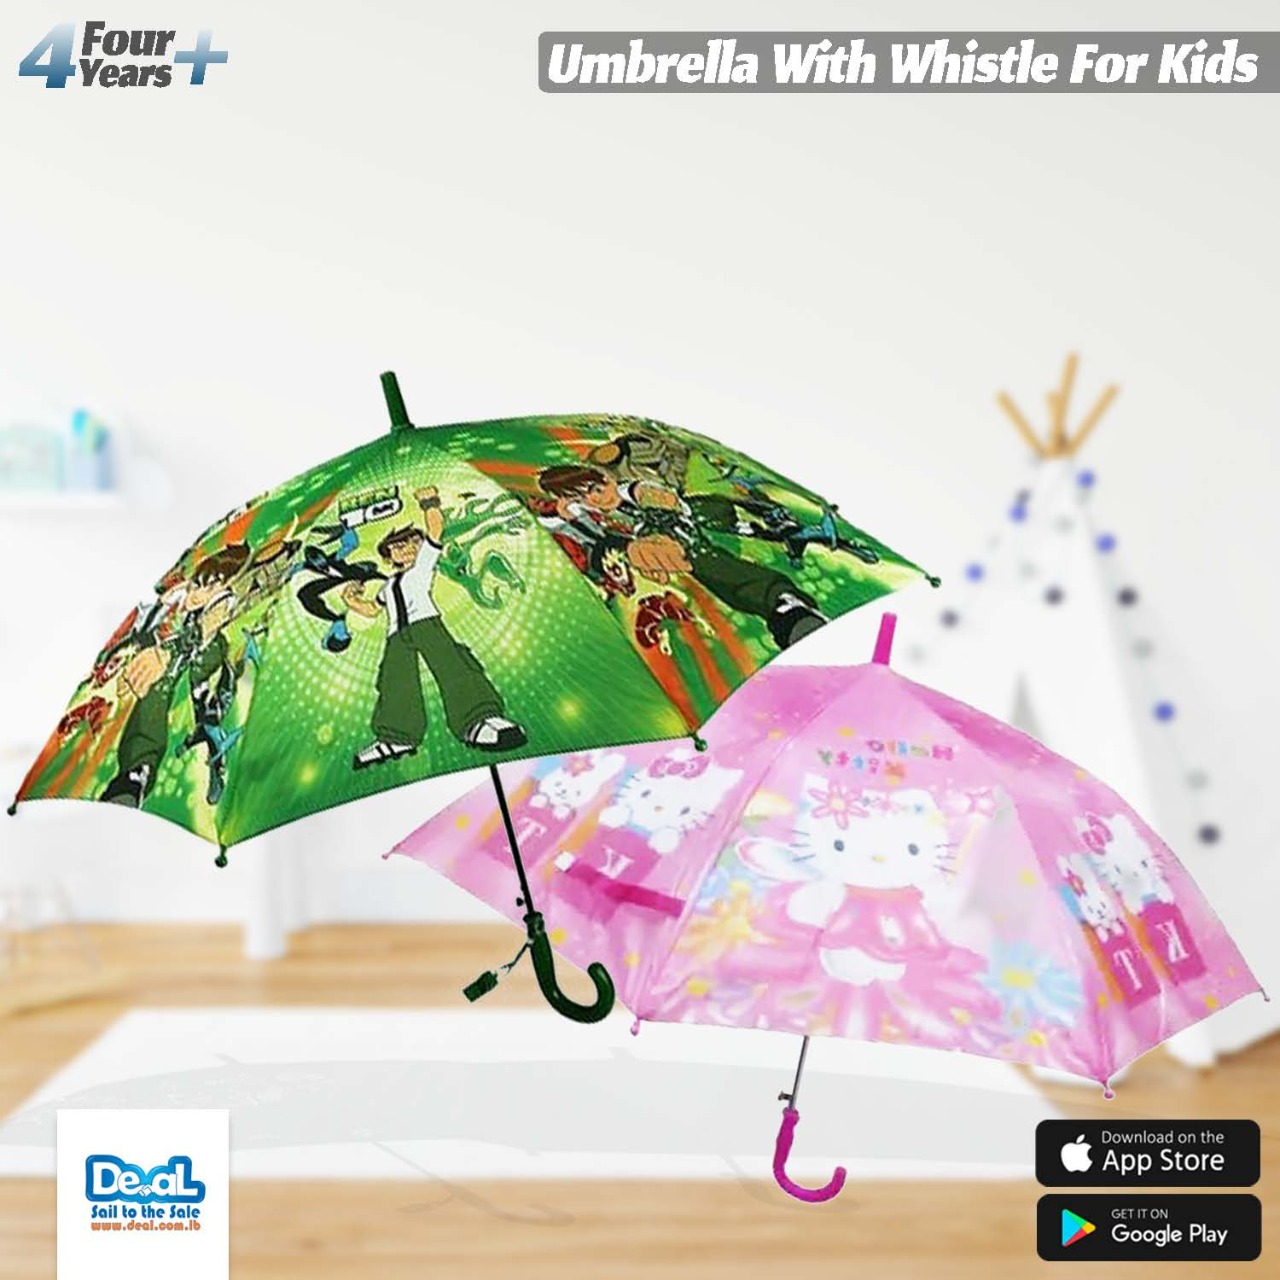 Umbrella+With+Whistle+For+Kids